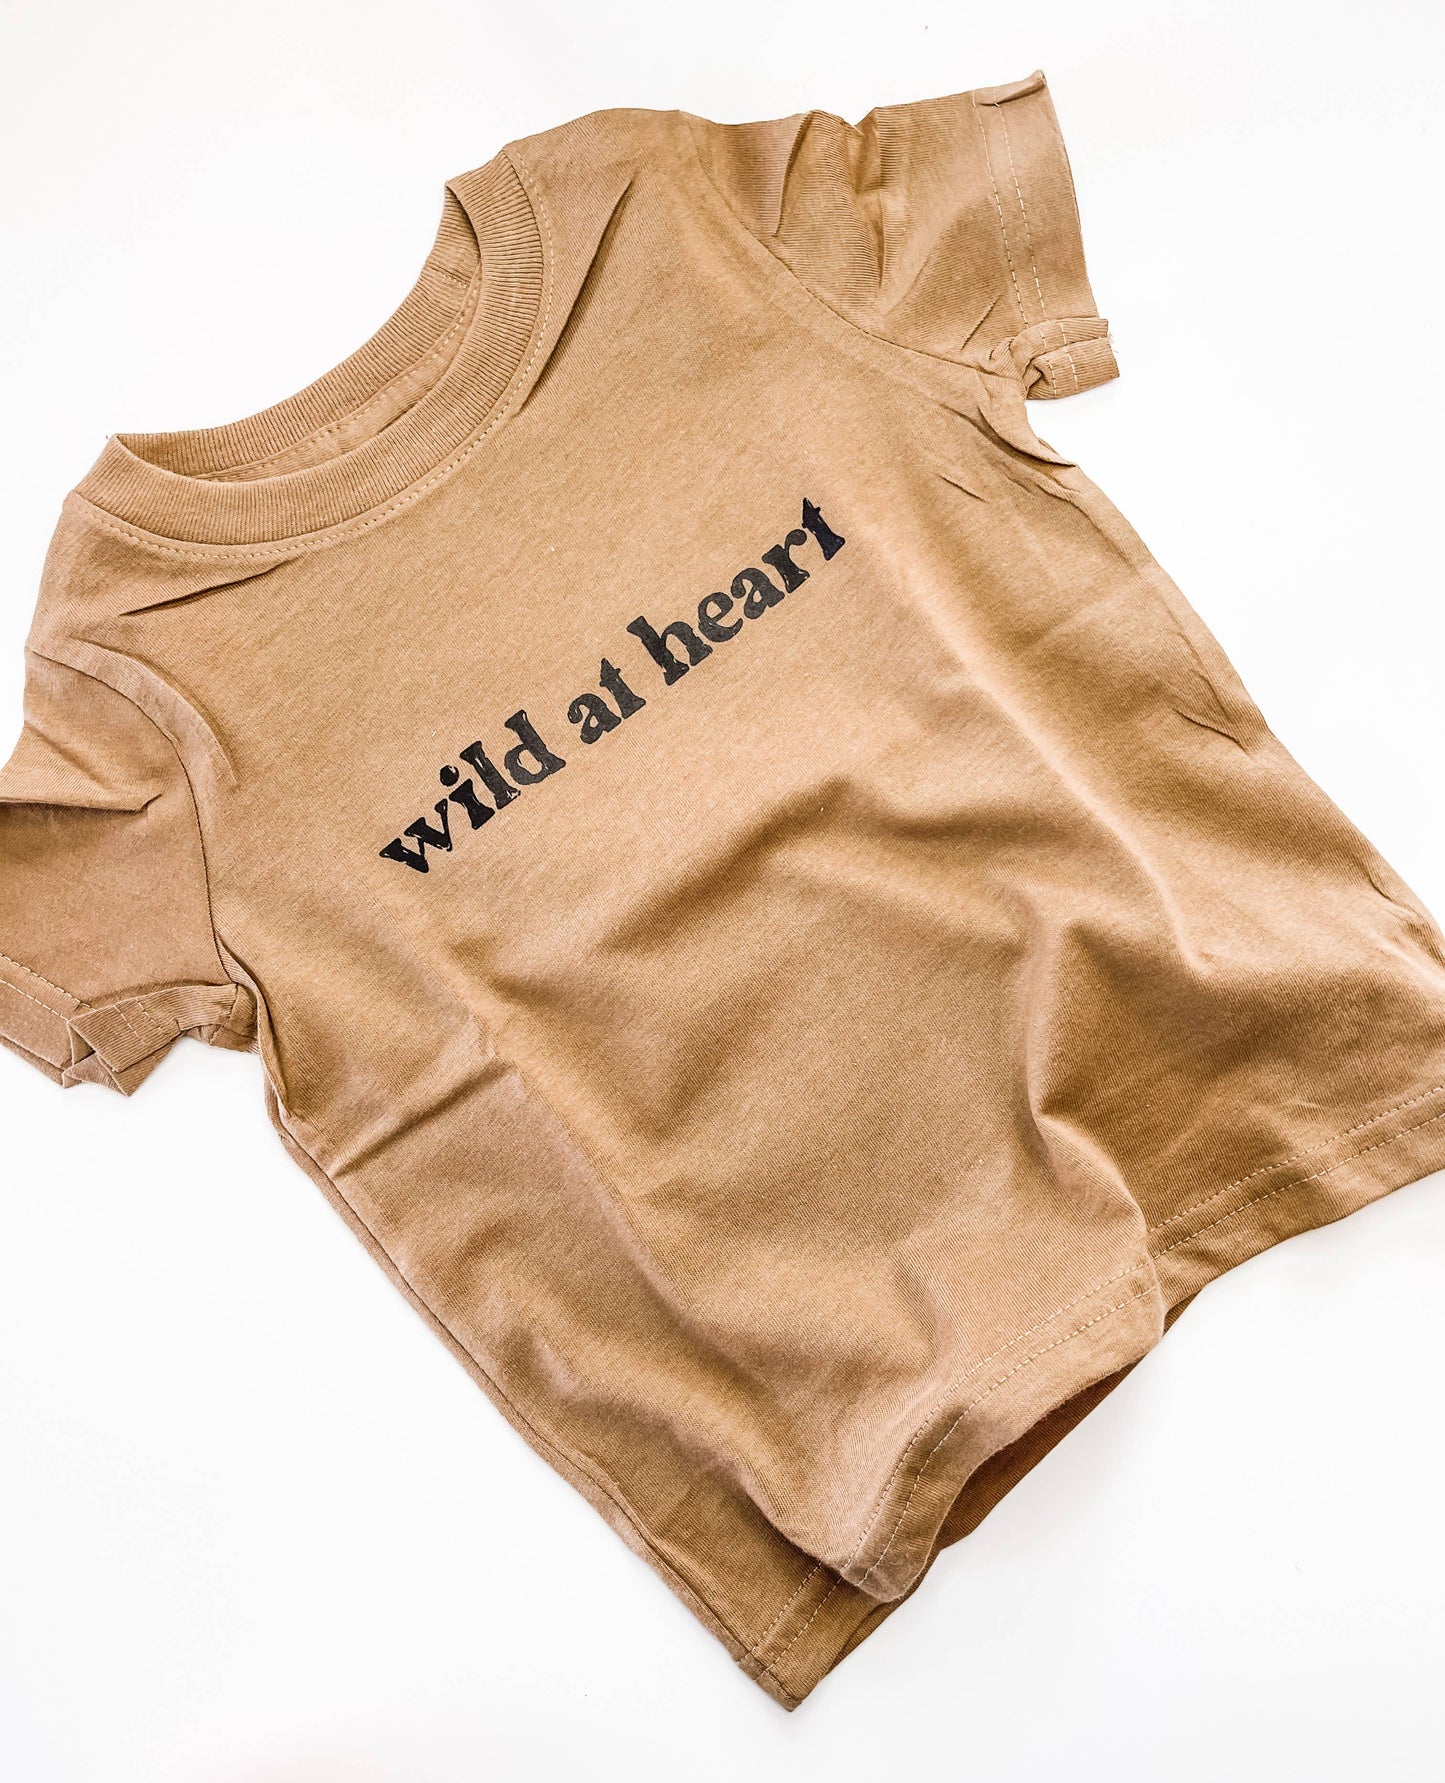 Saved by Grace Co. - Wild at Heart Neutral Tone  - Baby/Toddler Tee